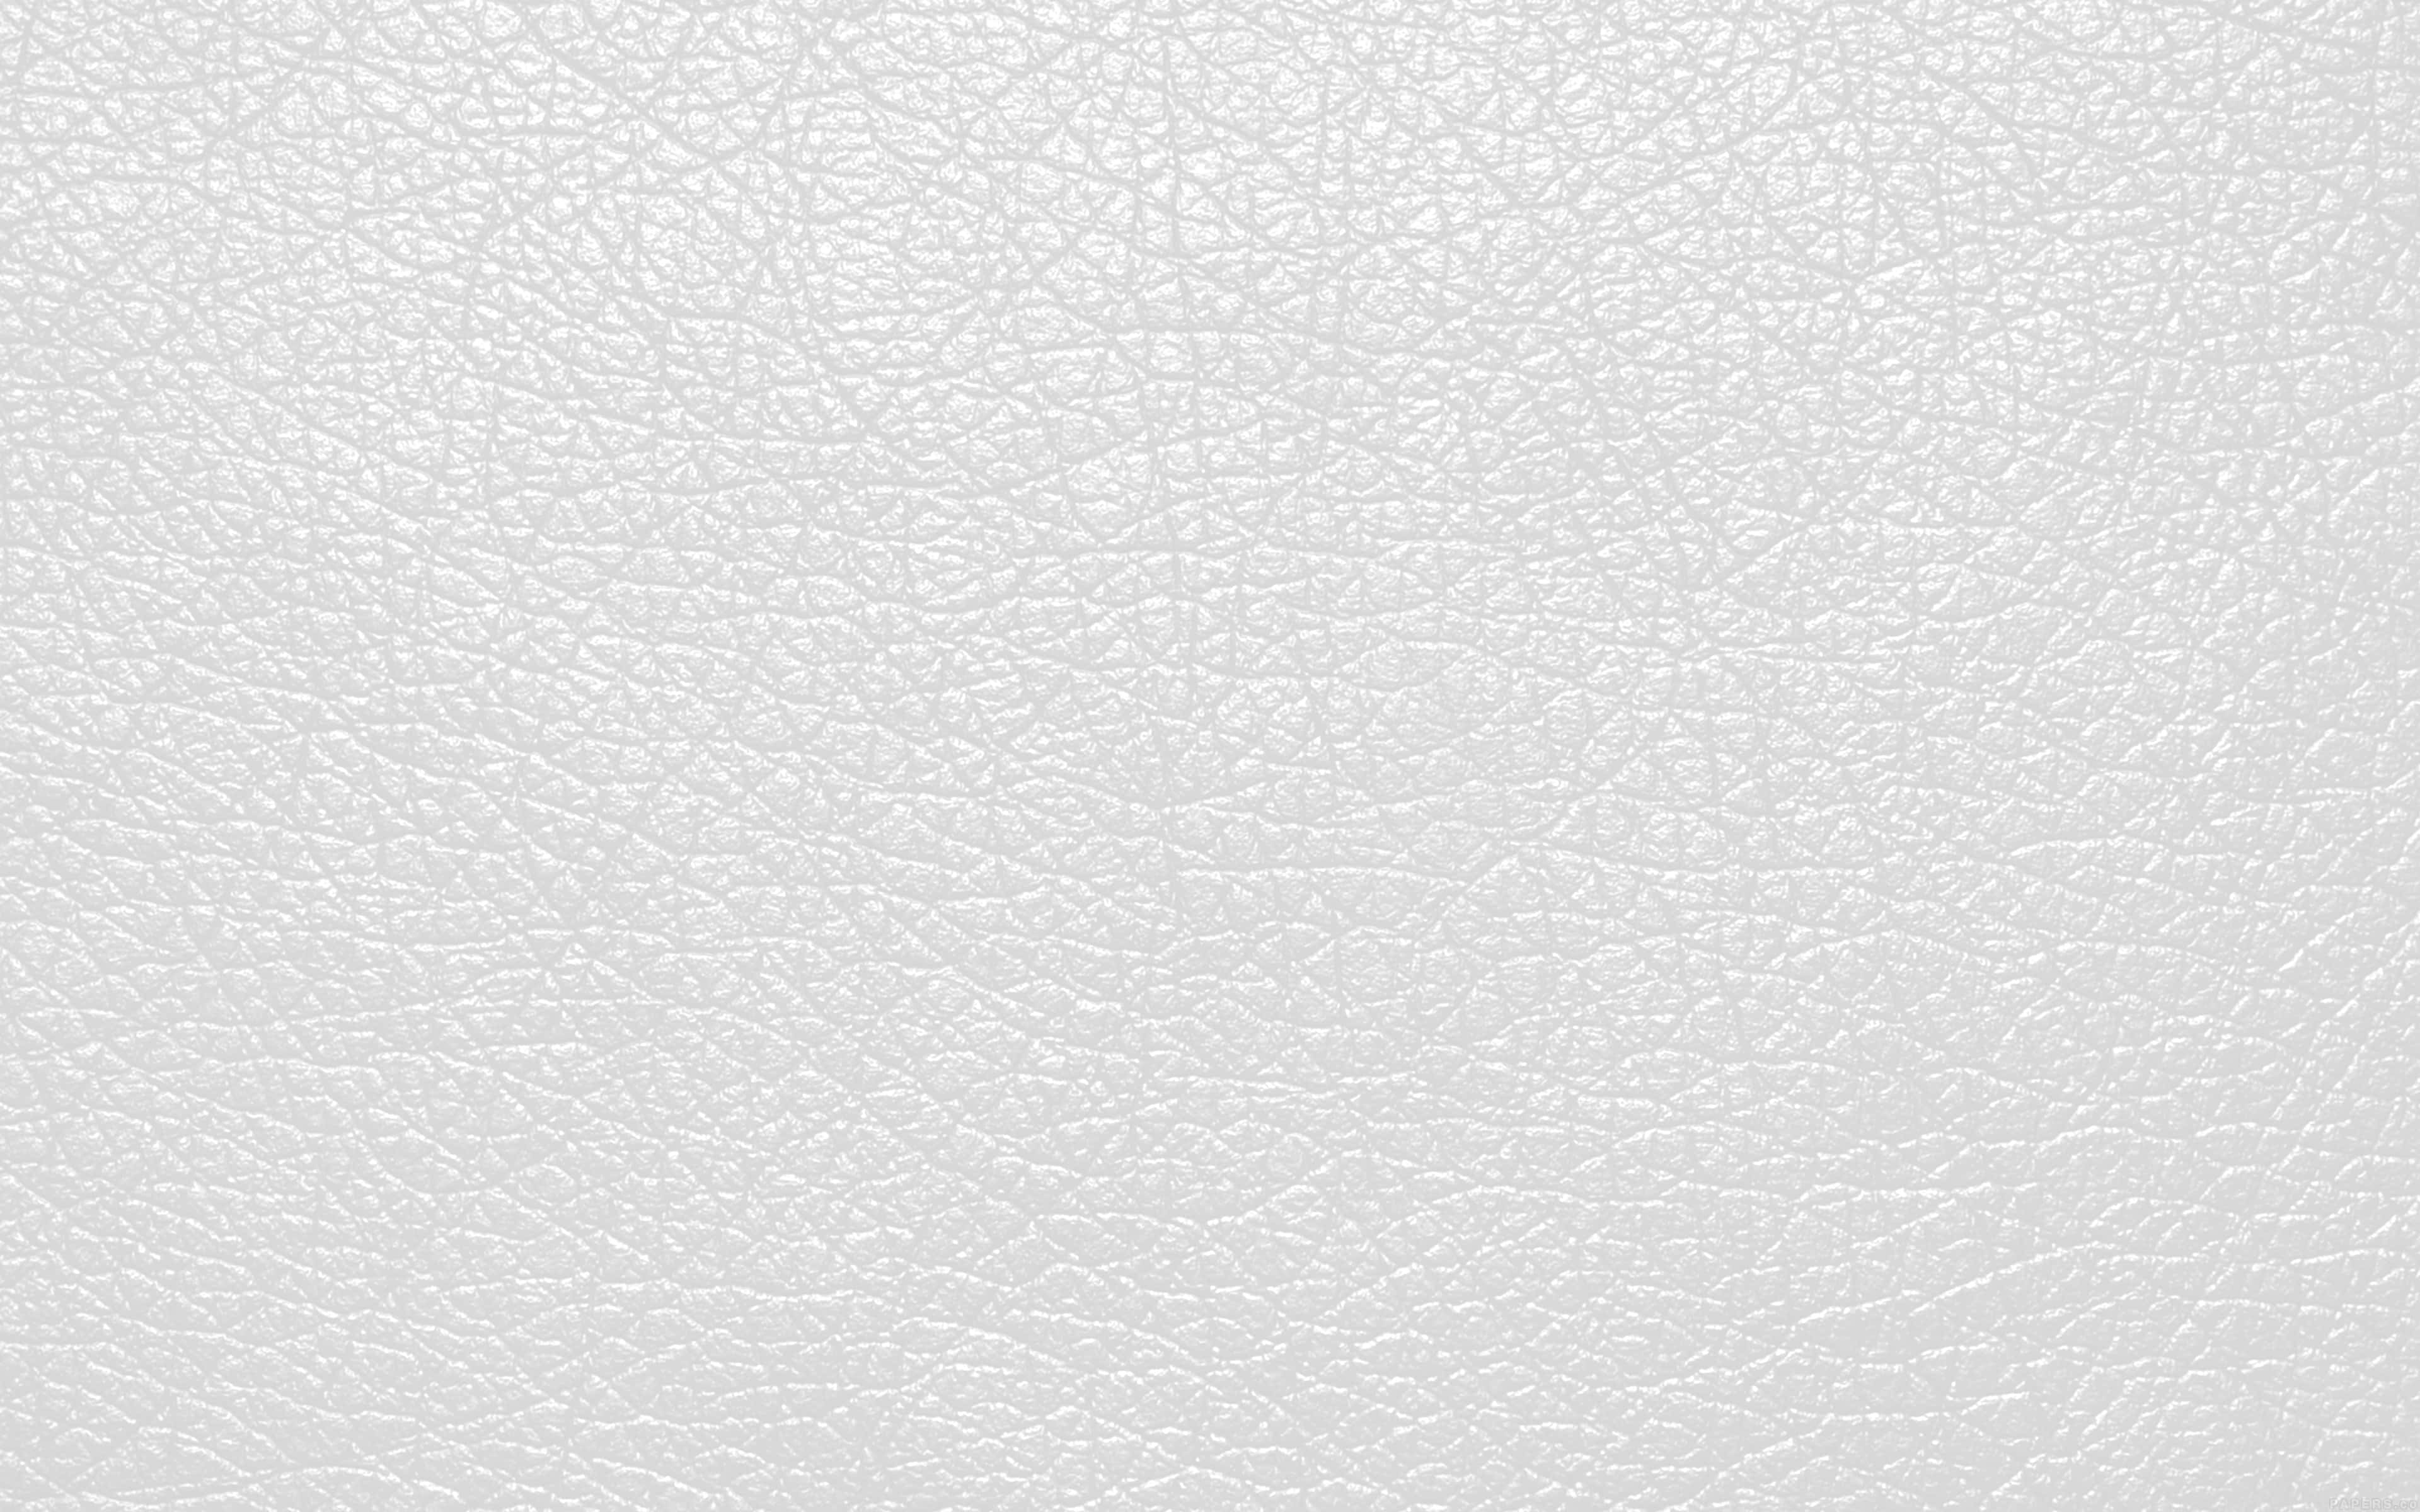 Sheet Leather White Texture Pictures